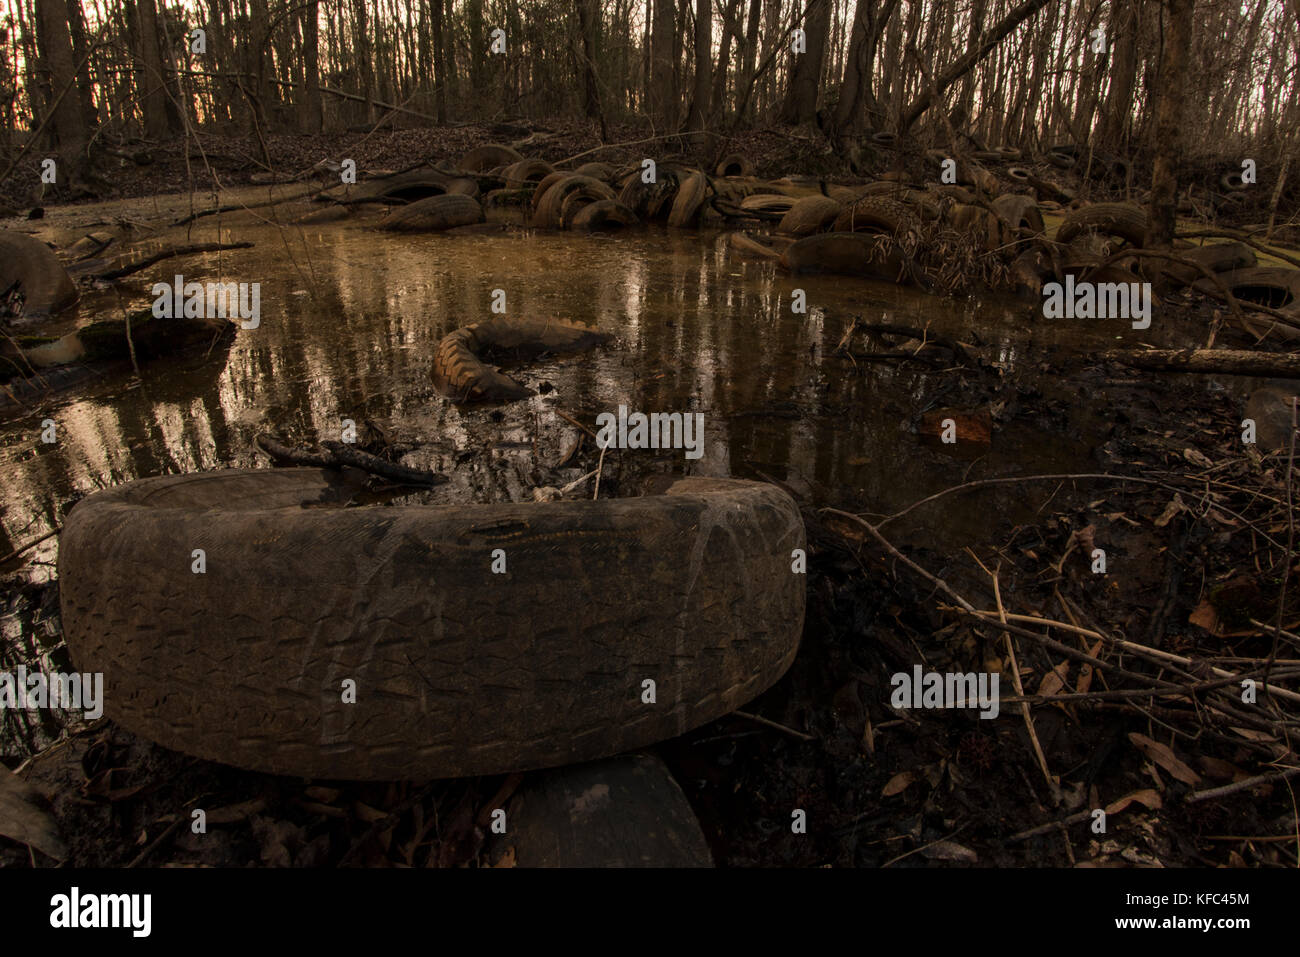 A polluted wetland in North Carolina that has been used as a illegal dumping site for tires. Stock Photo